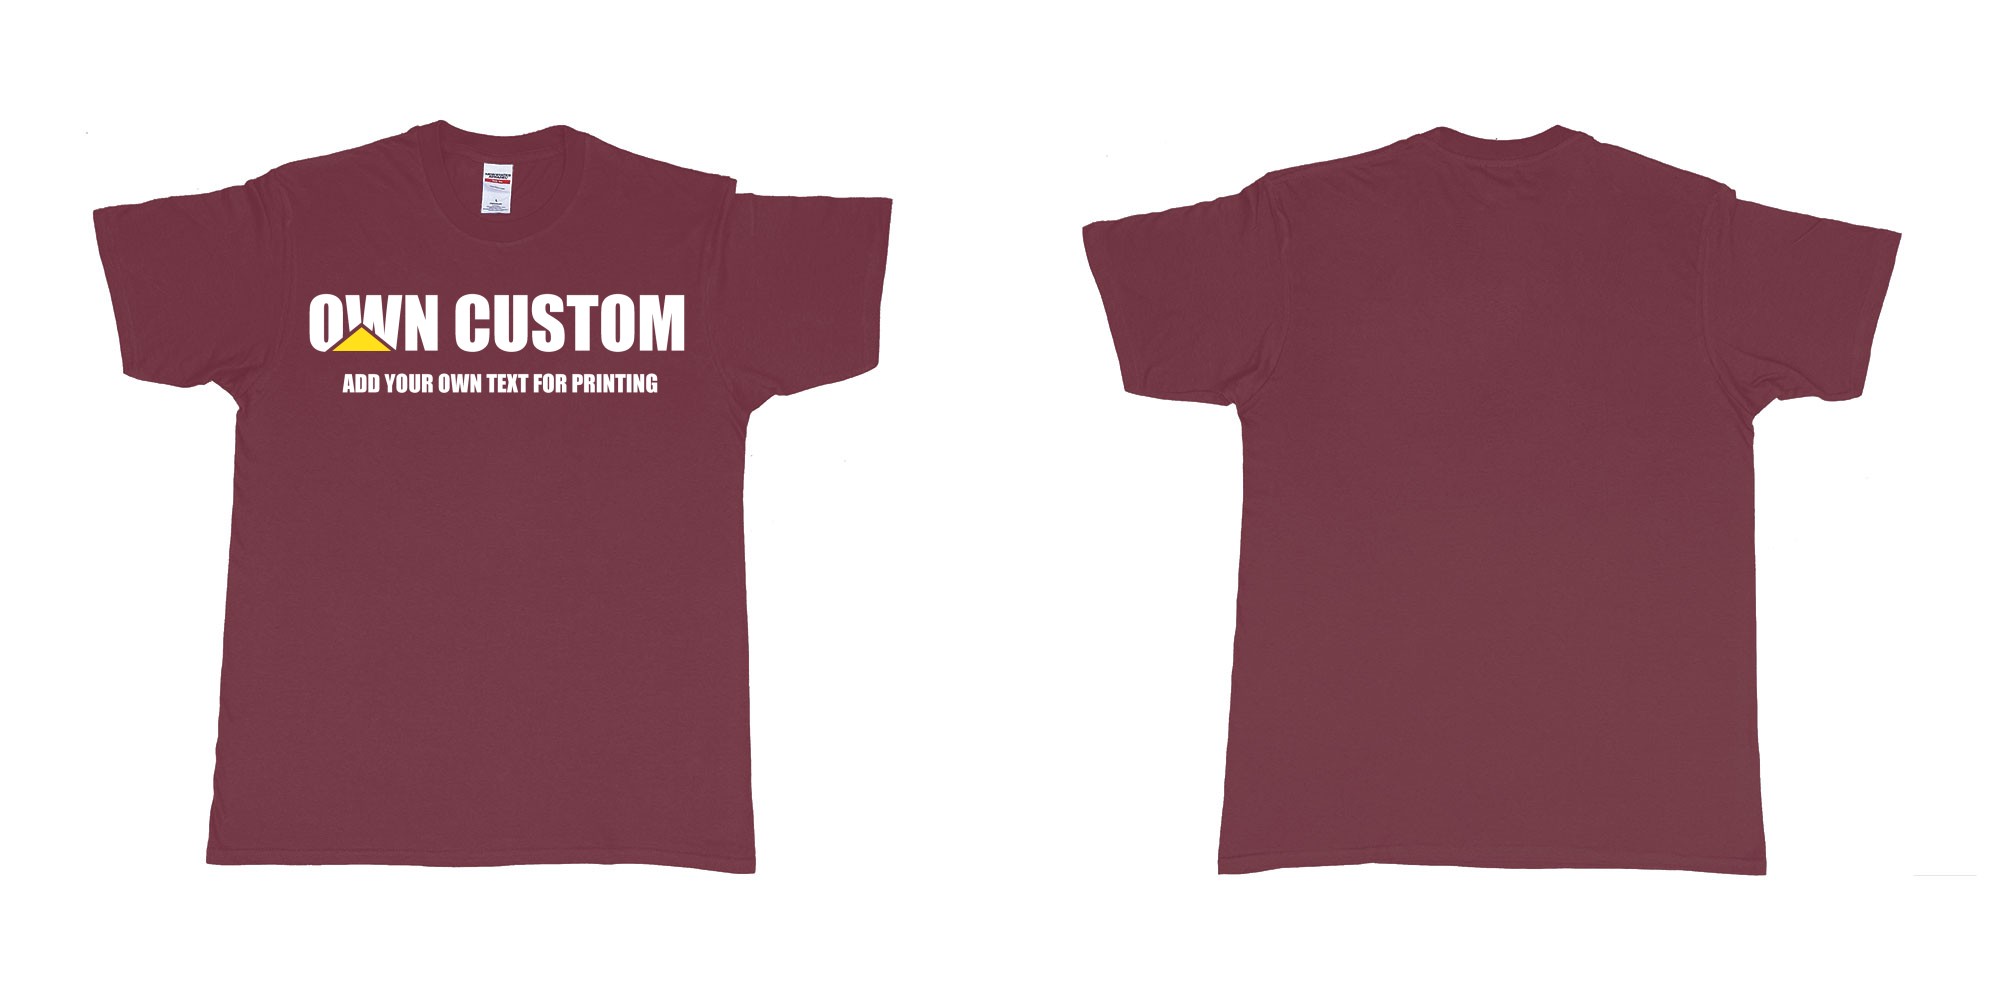 Custom tshirt design caterpillar inc logo custom text printing shirt in fabric color marron choice your own text made in Bali by The Pirate Way